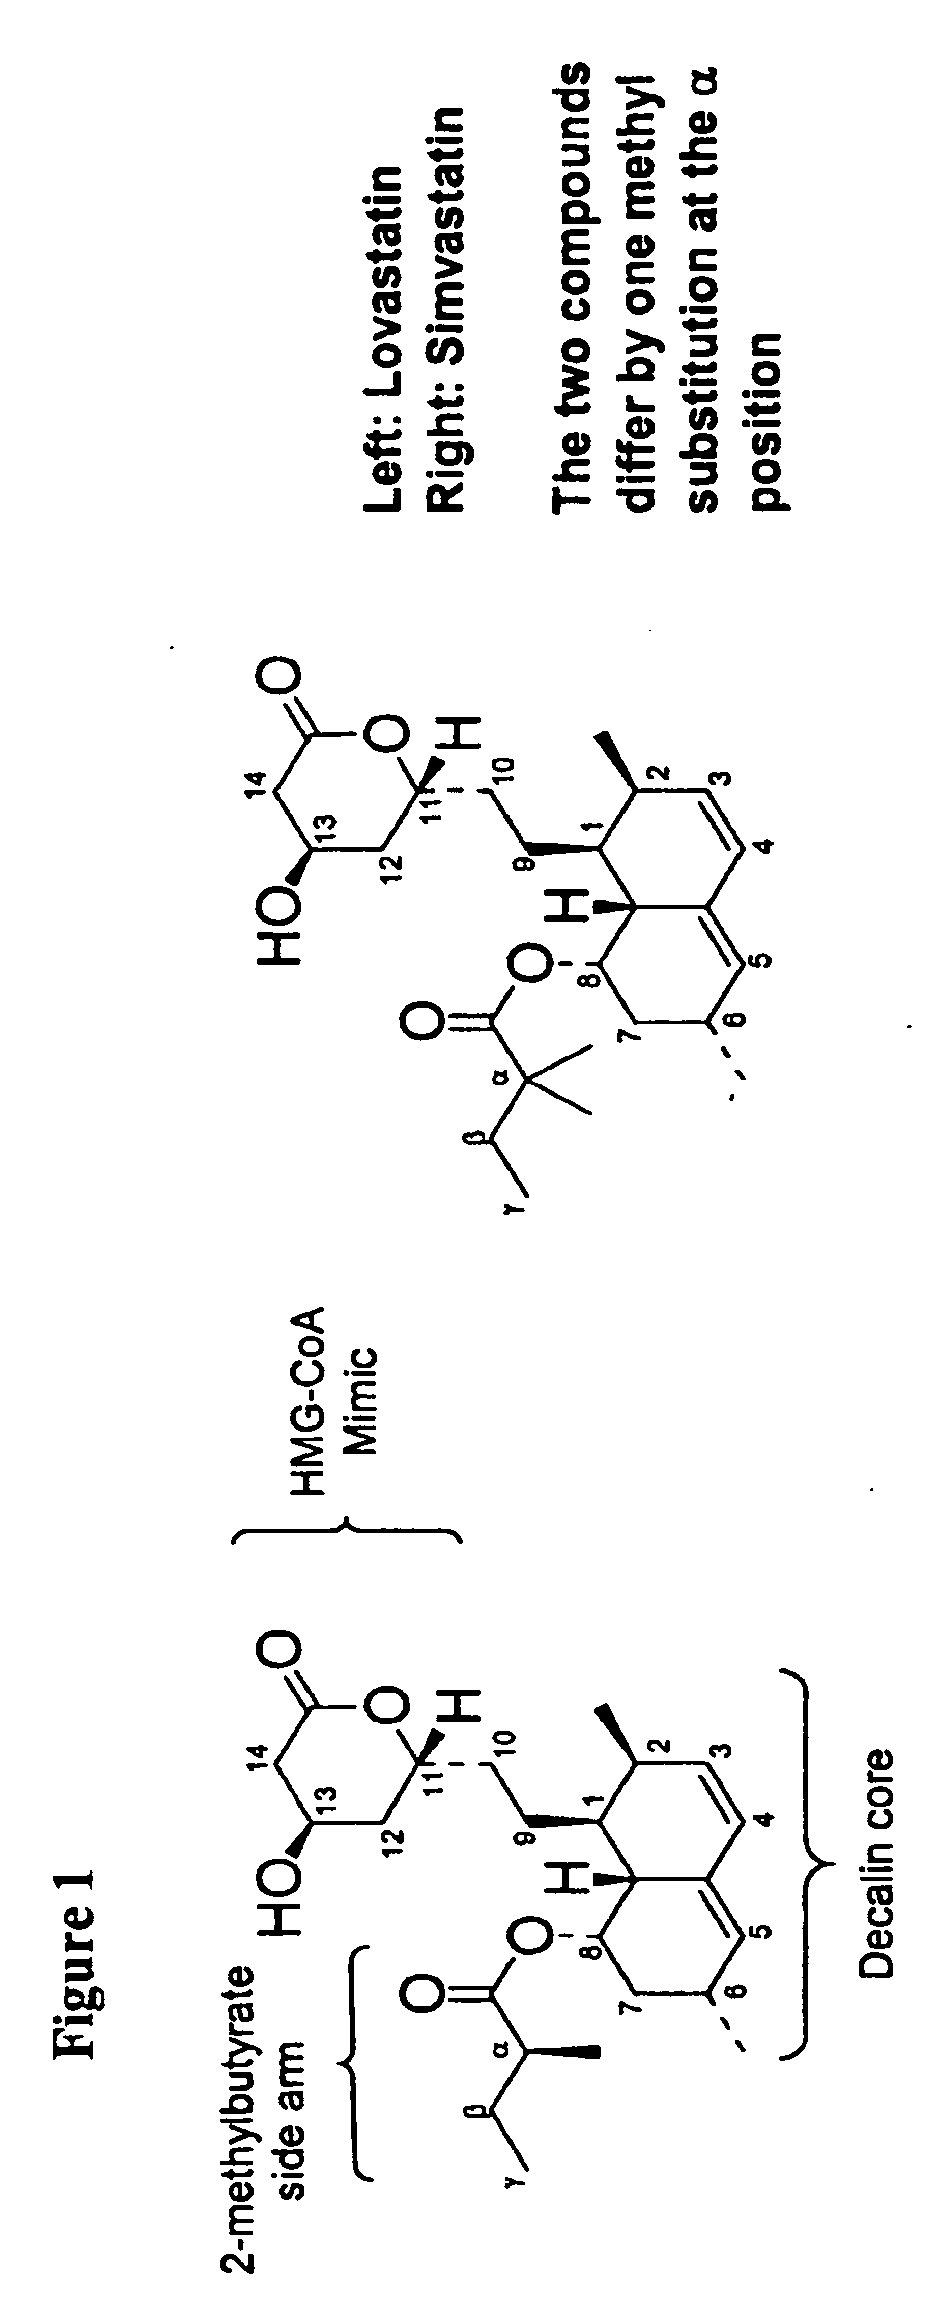 Methods and Materials for Making Simvastatin and Related Compounds